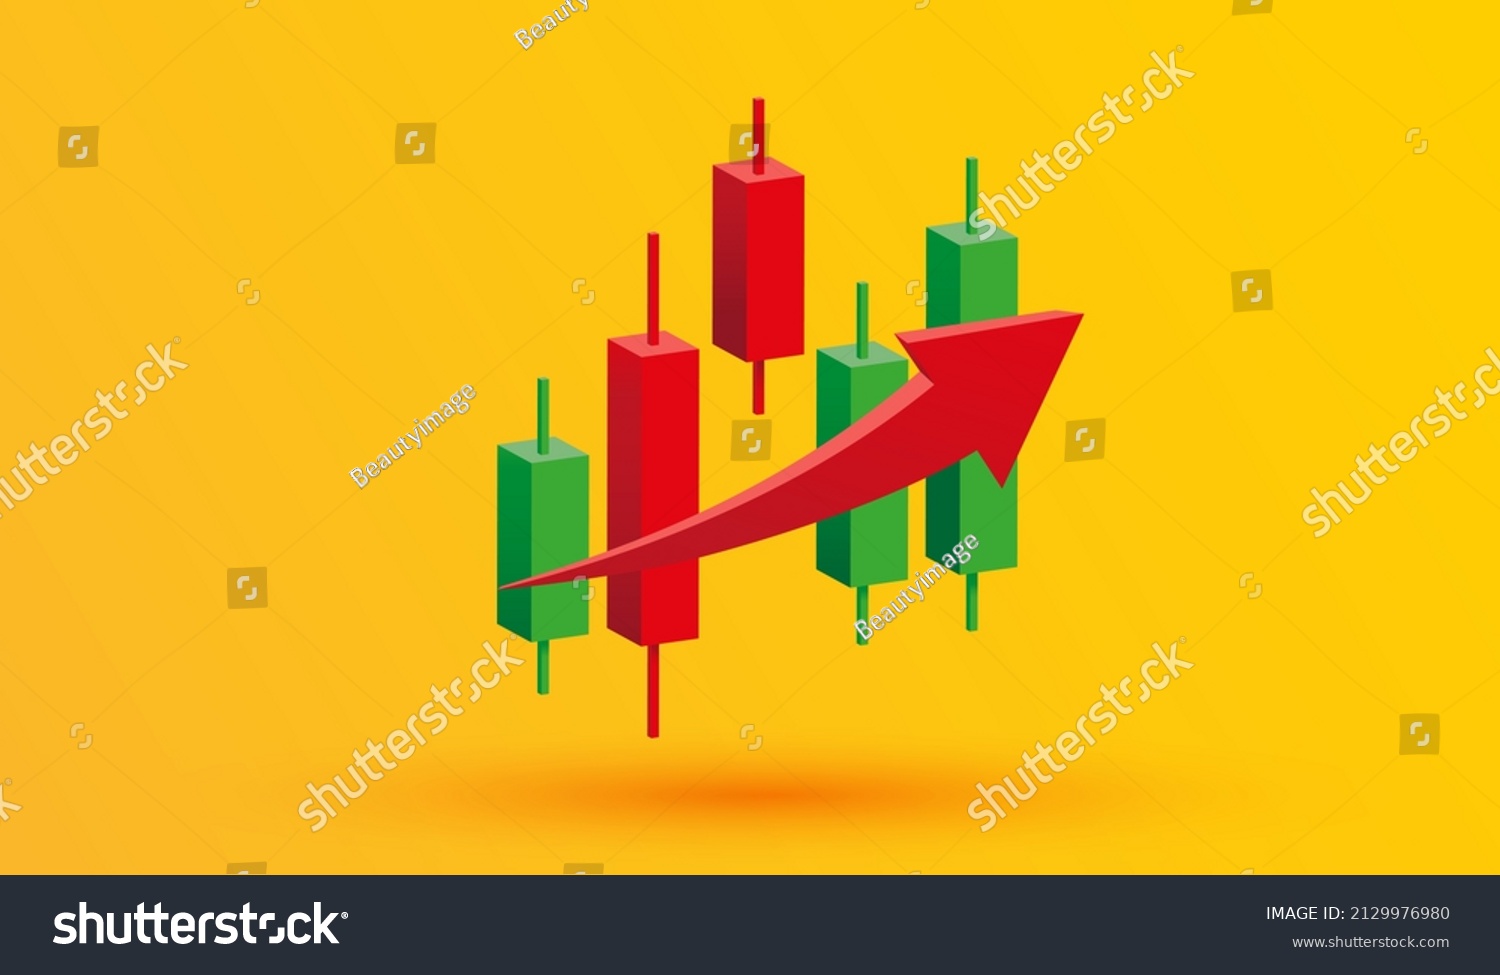 SVG of Growth stock diagram financial graph. candlestick with arrow up Trading stock or forex 3d icon vector illustration style svg